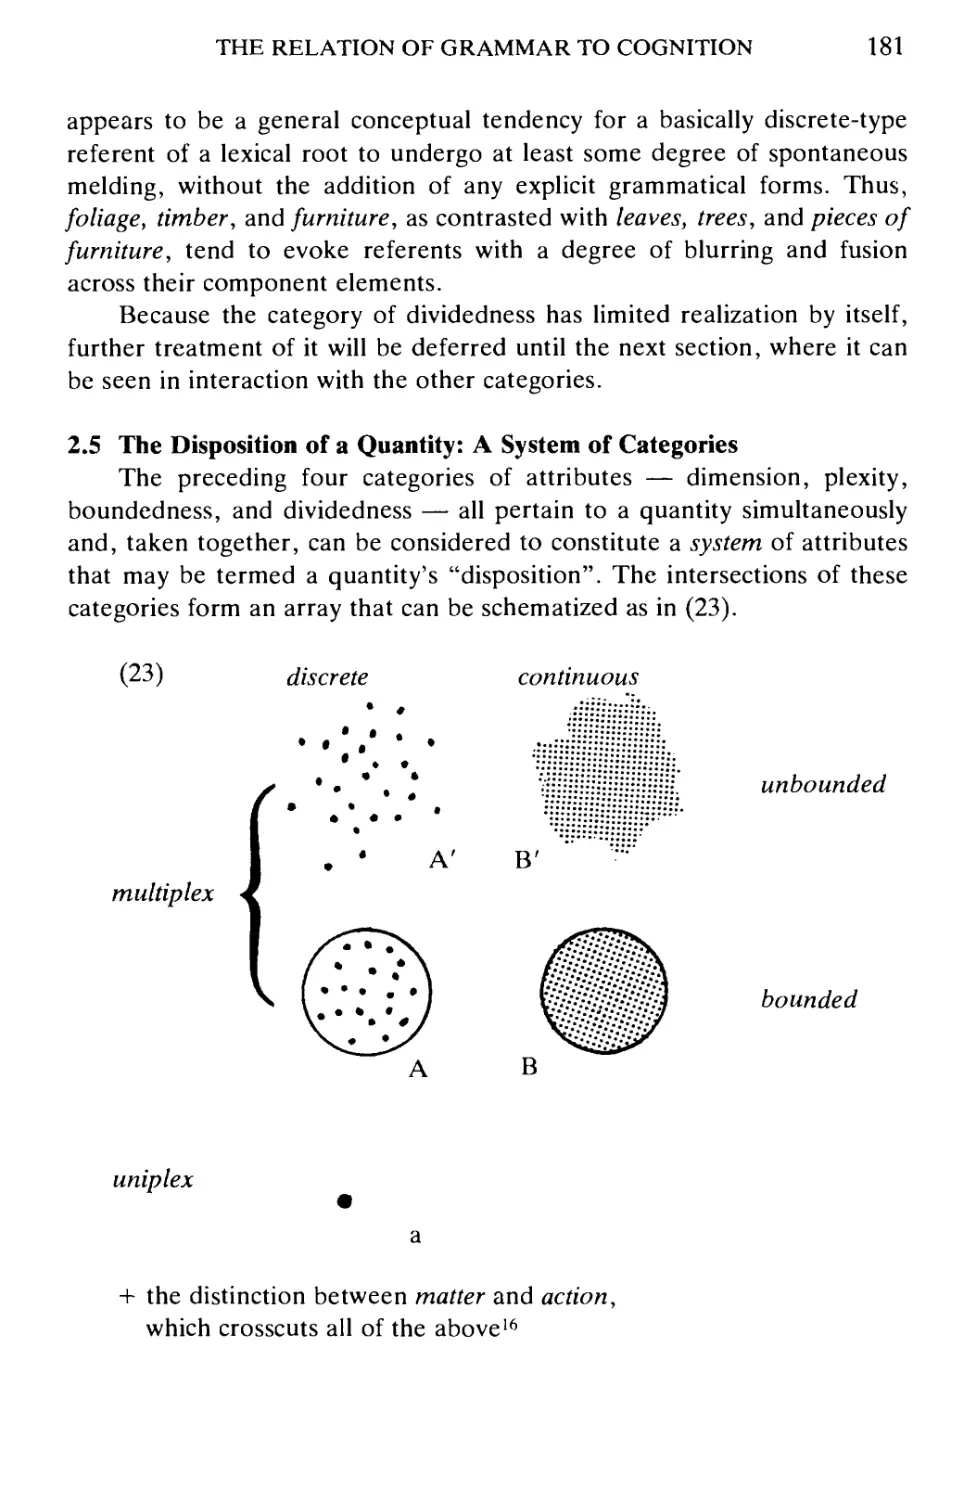 2.5 The Disposition of a Quantity: A System of Categories